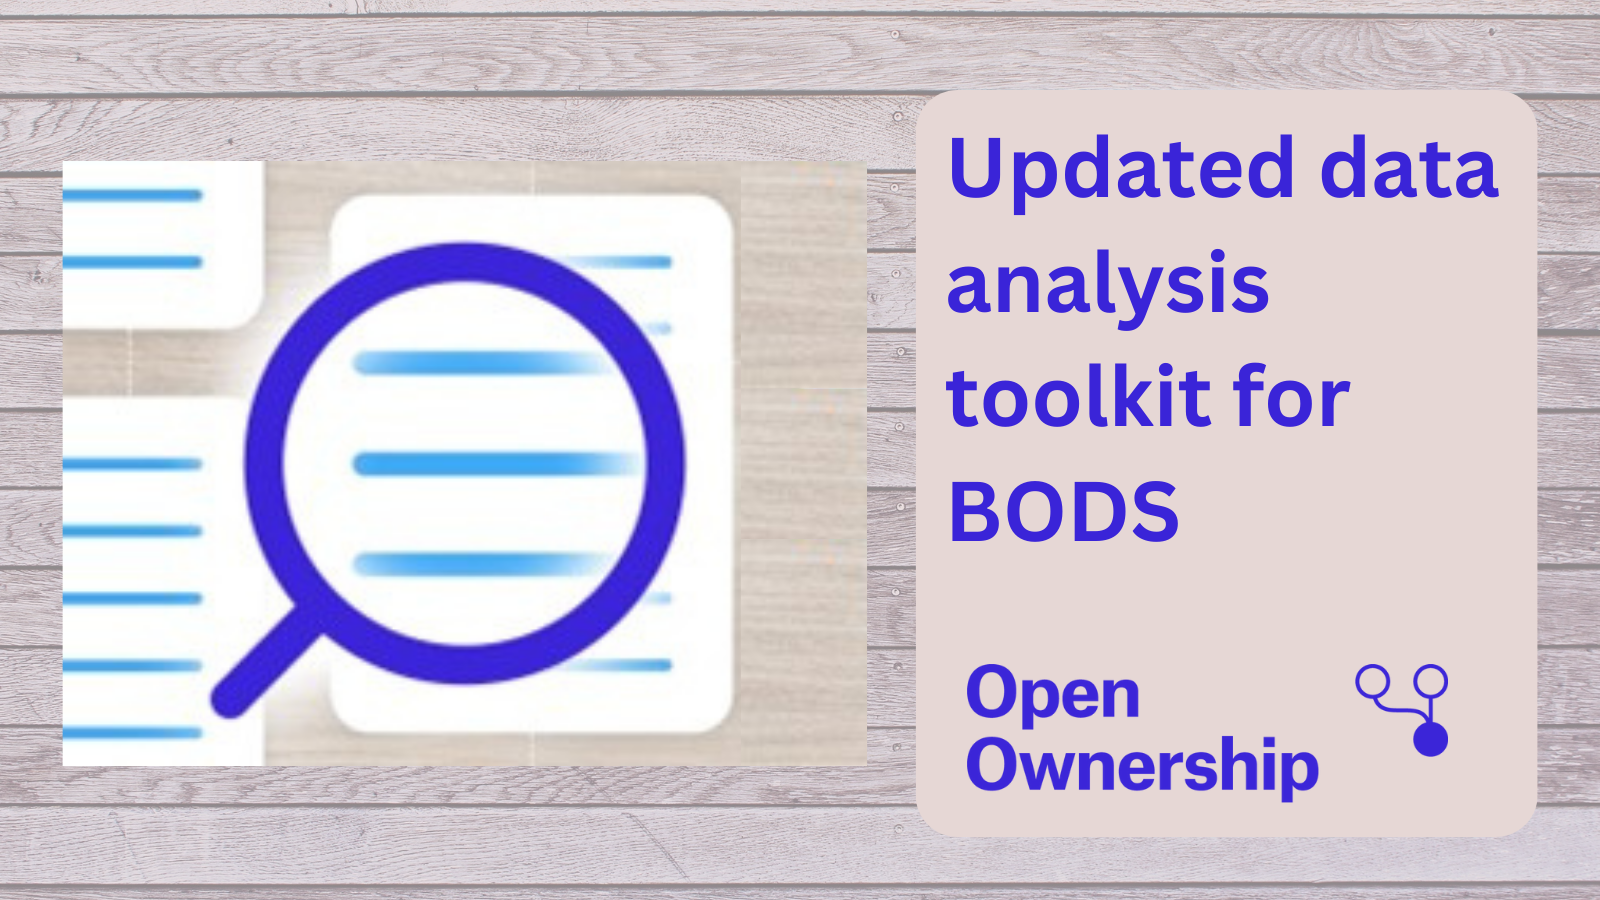 Updated data analysis toolkit for BODS